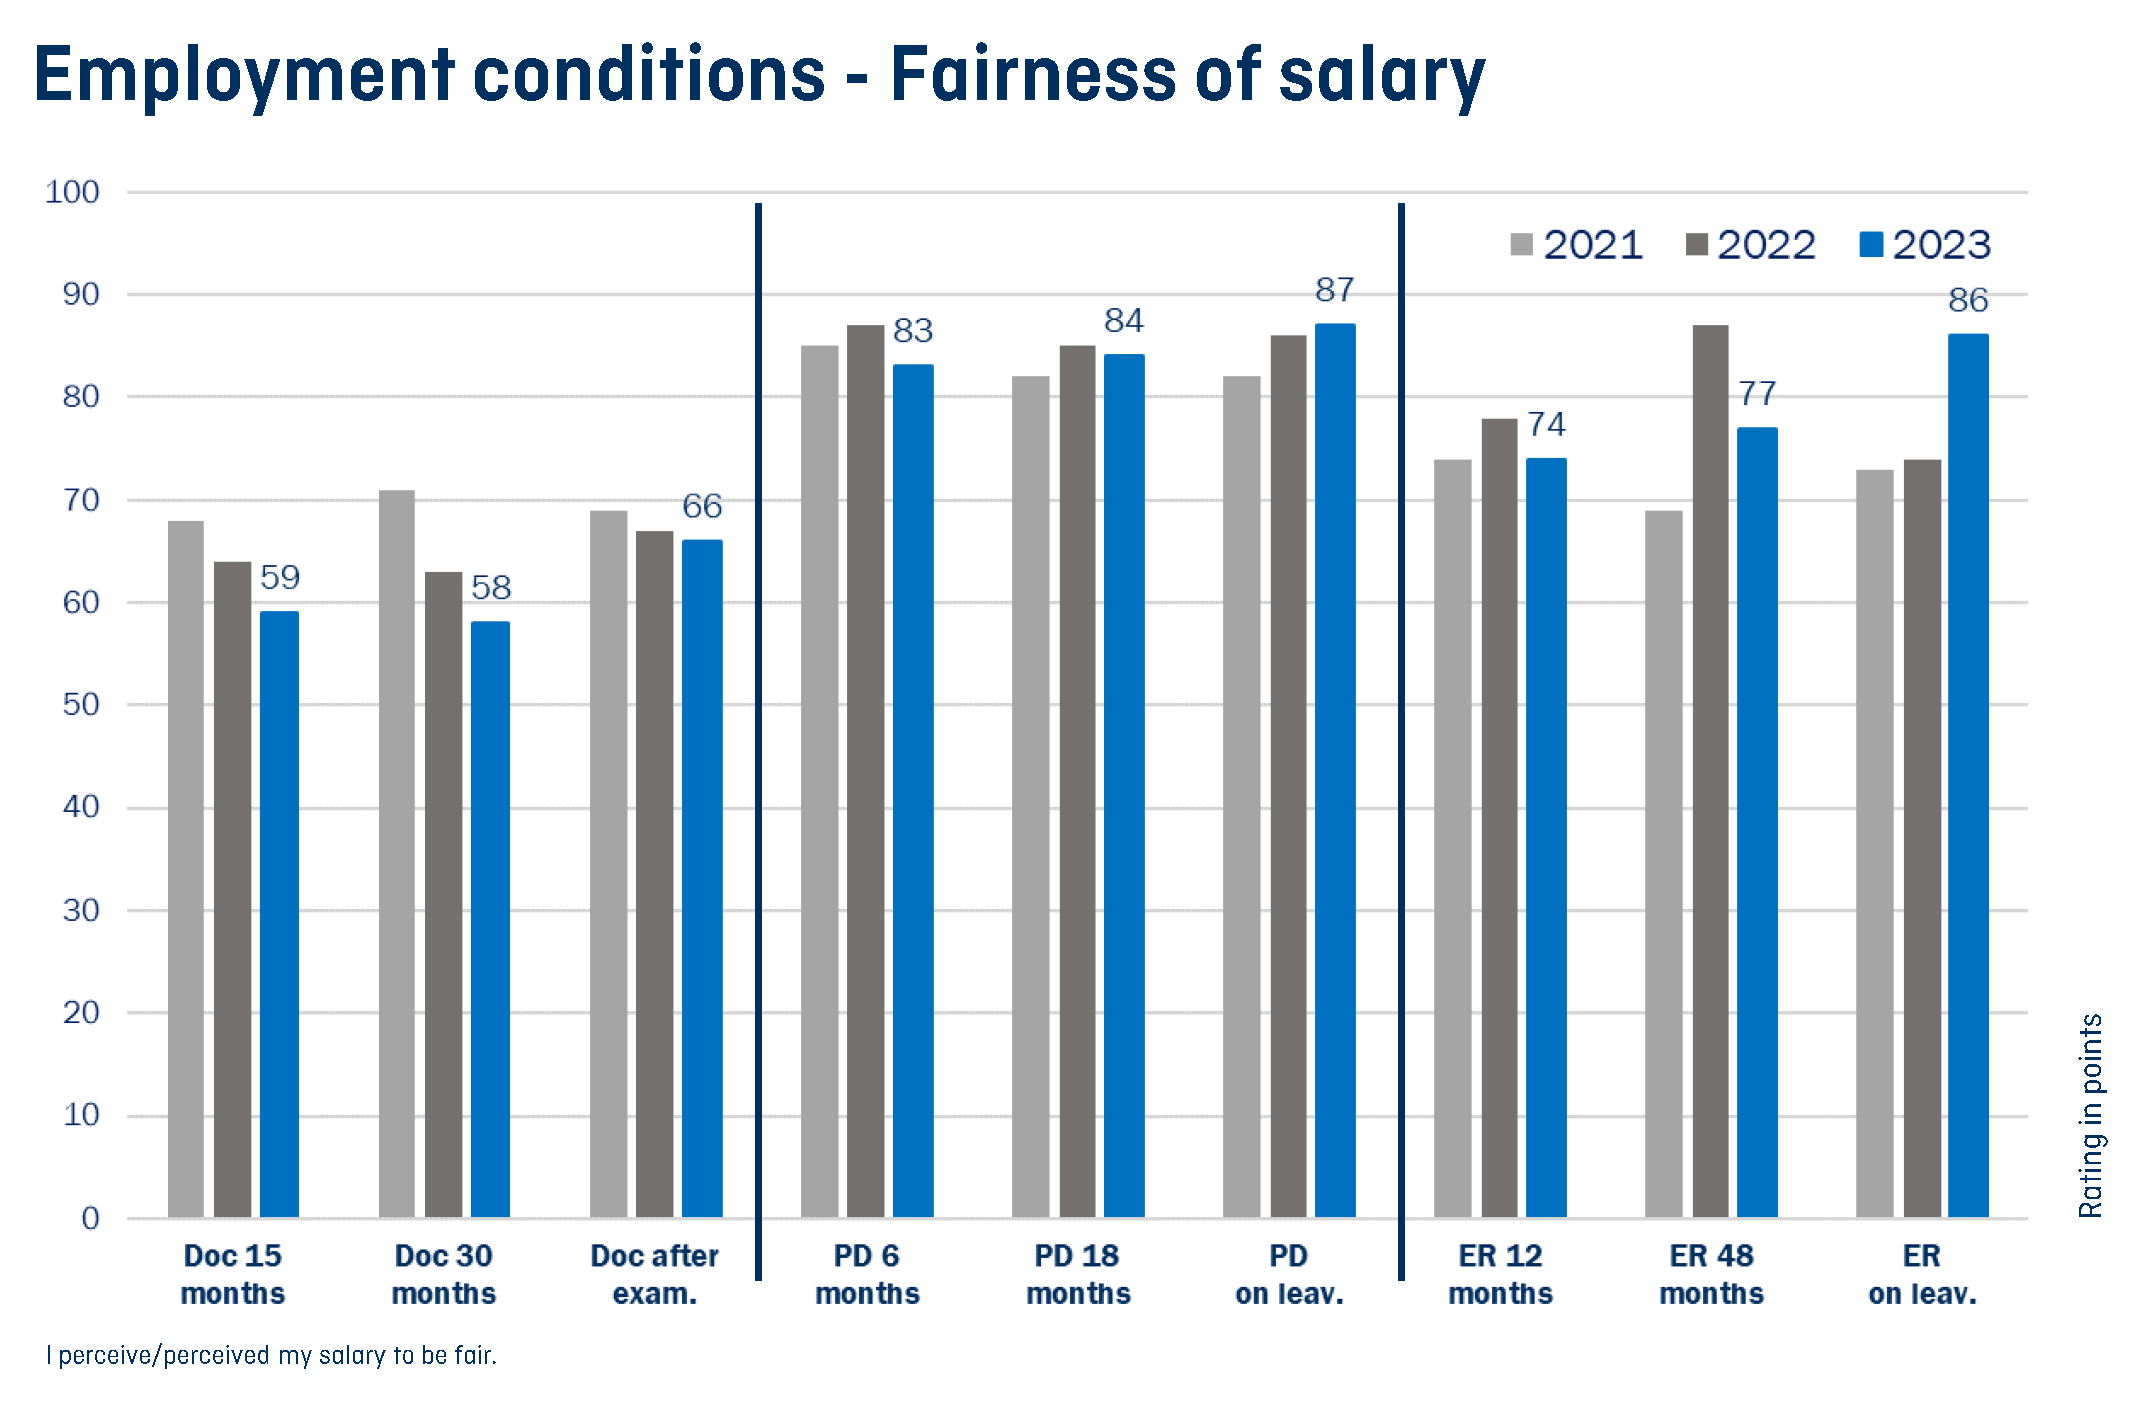 Enlarged view: Graph showing satisfaction with employment conditions and remuneration over the years 2021, 2022 and 2023 for different employment positions.